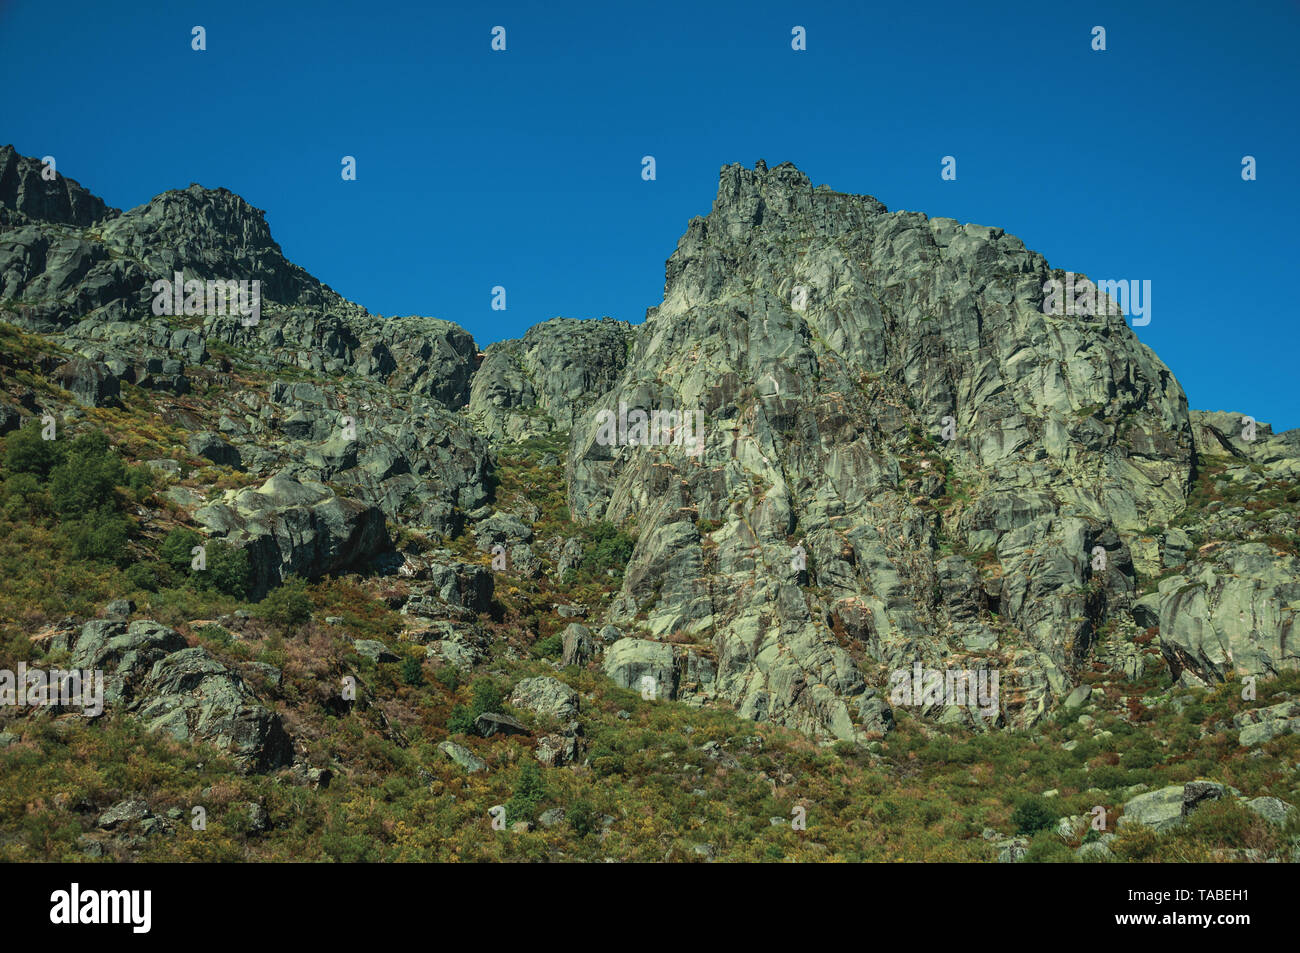 Mountainous landscape with rocky cliffs covered by bushes at the highlands of Serra da Estrela. The highest mountain range in continental Portugal. Stock Photo